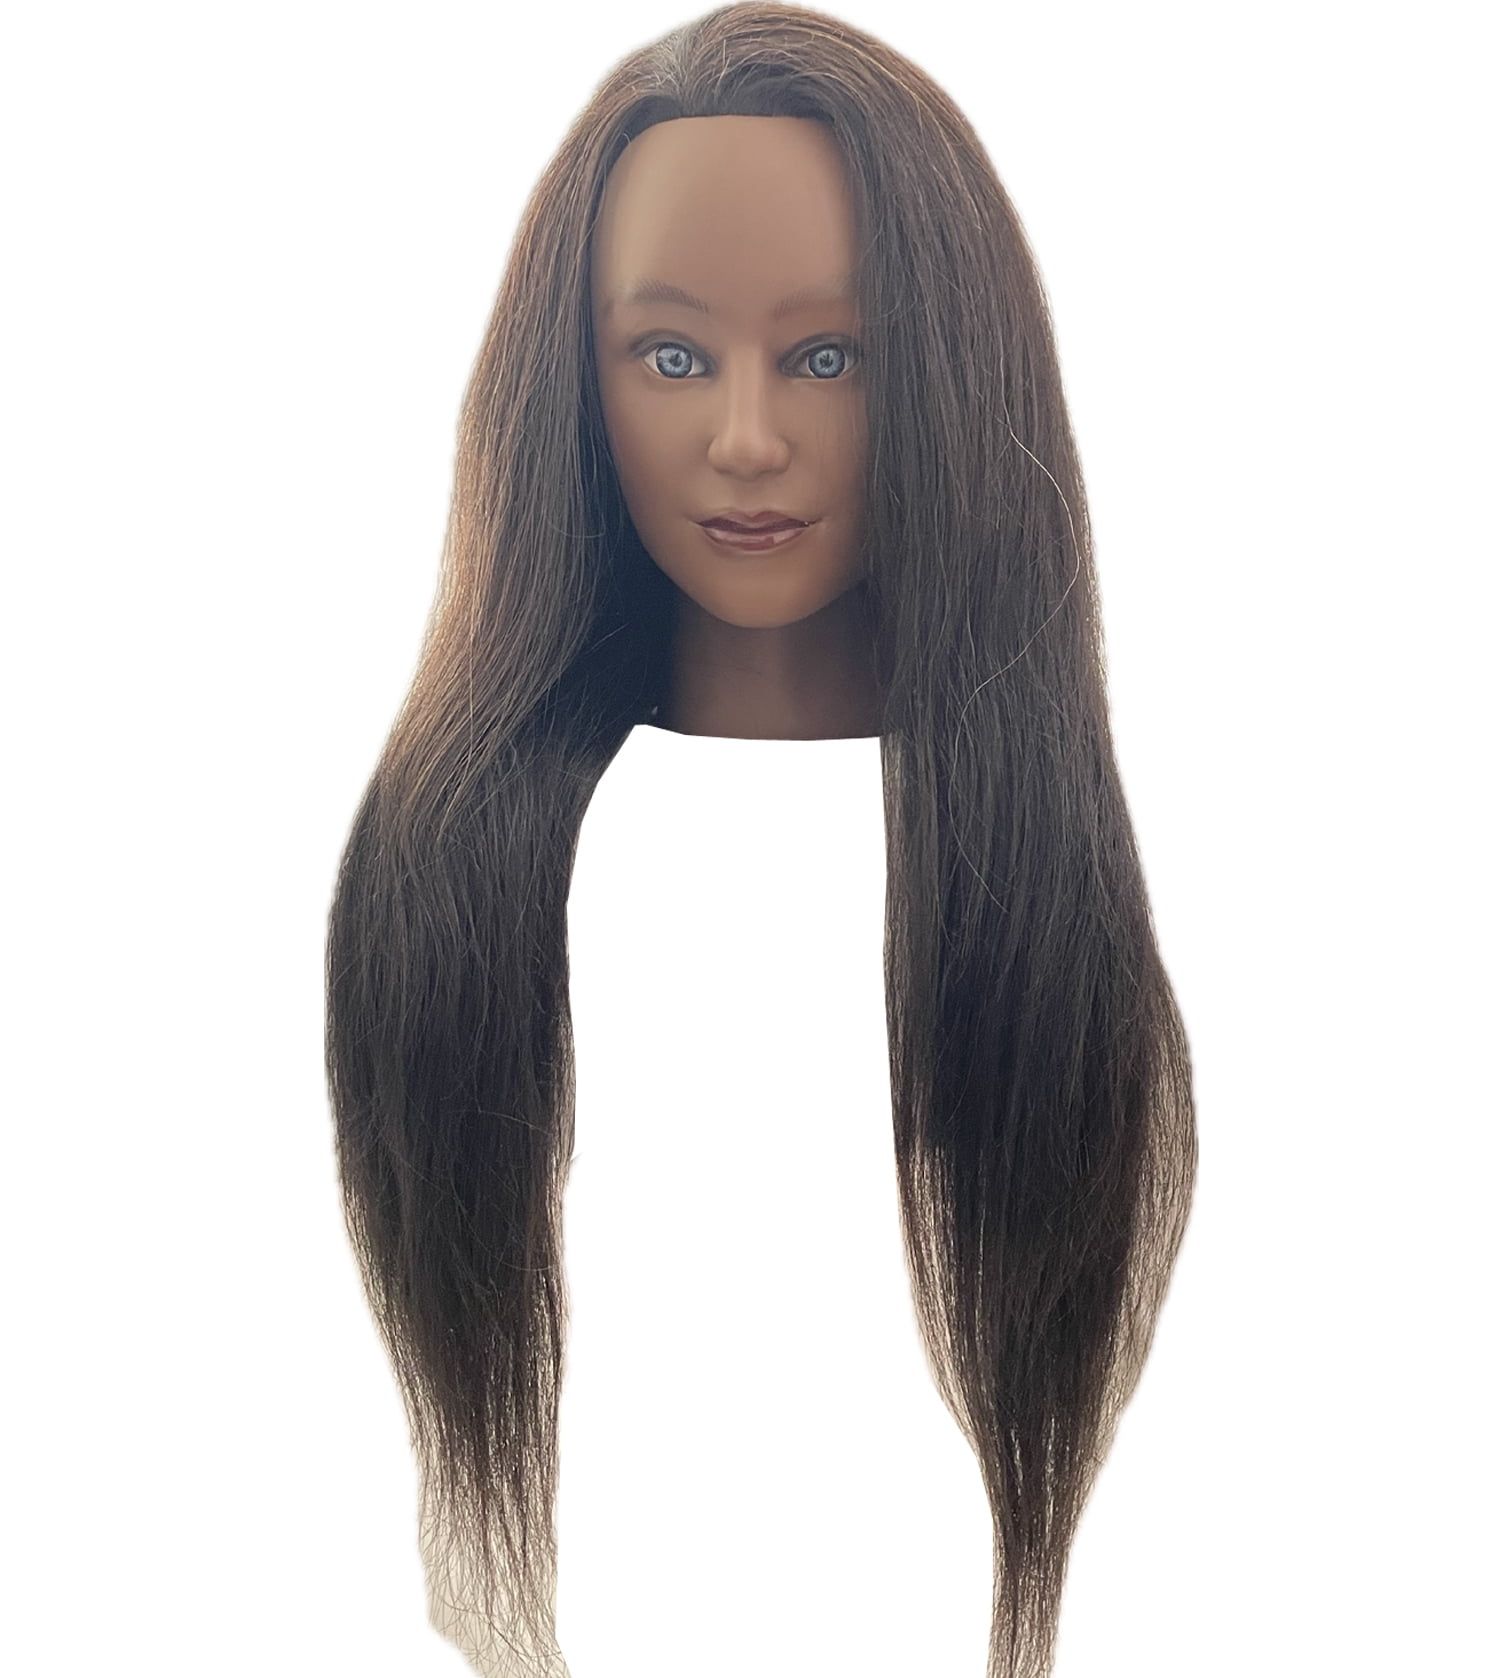 AIMEI 30'' Long Hair Styling Head Doll Hairdressing Training Head Mannequin  Hairstyles Doll + Clamp Hairdresser Mannequin Head